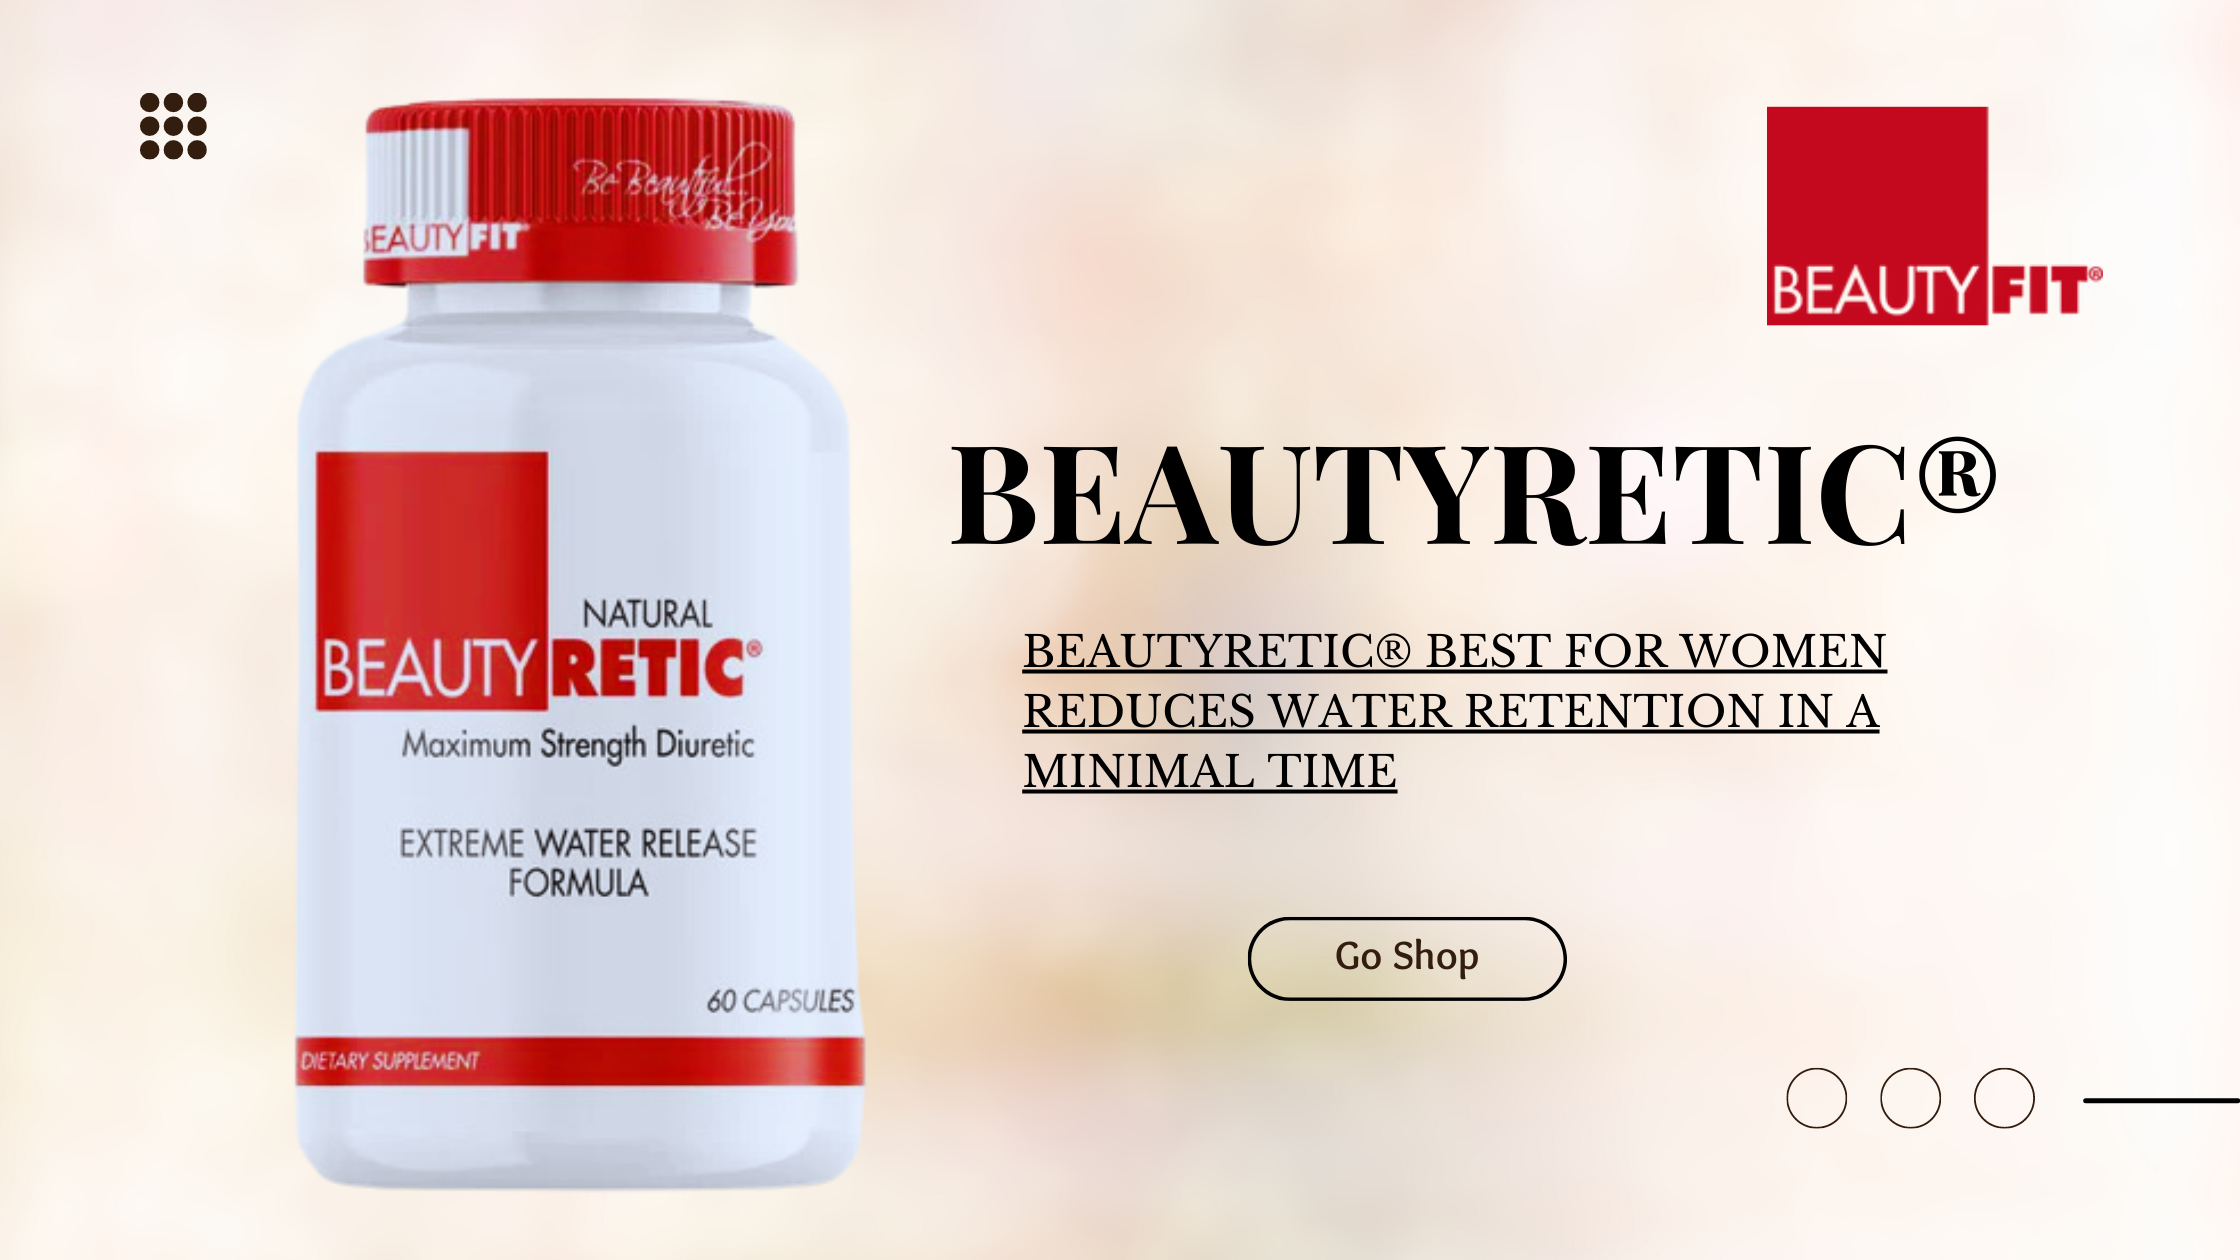 BeautyRetic® Best for Women reduces water retention in a minimal time